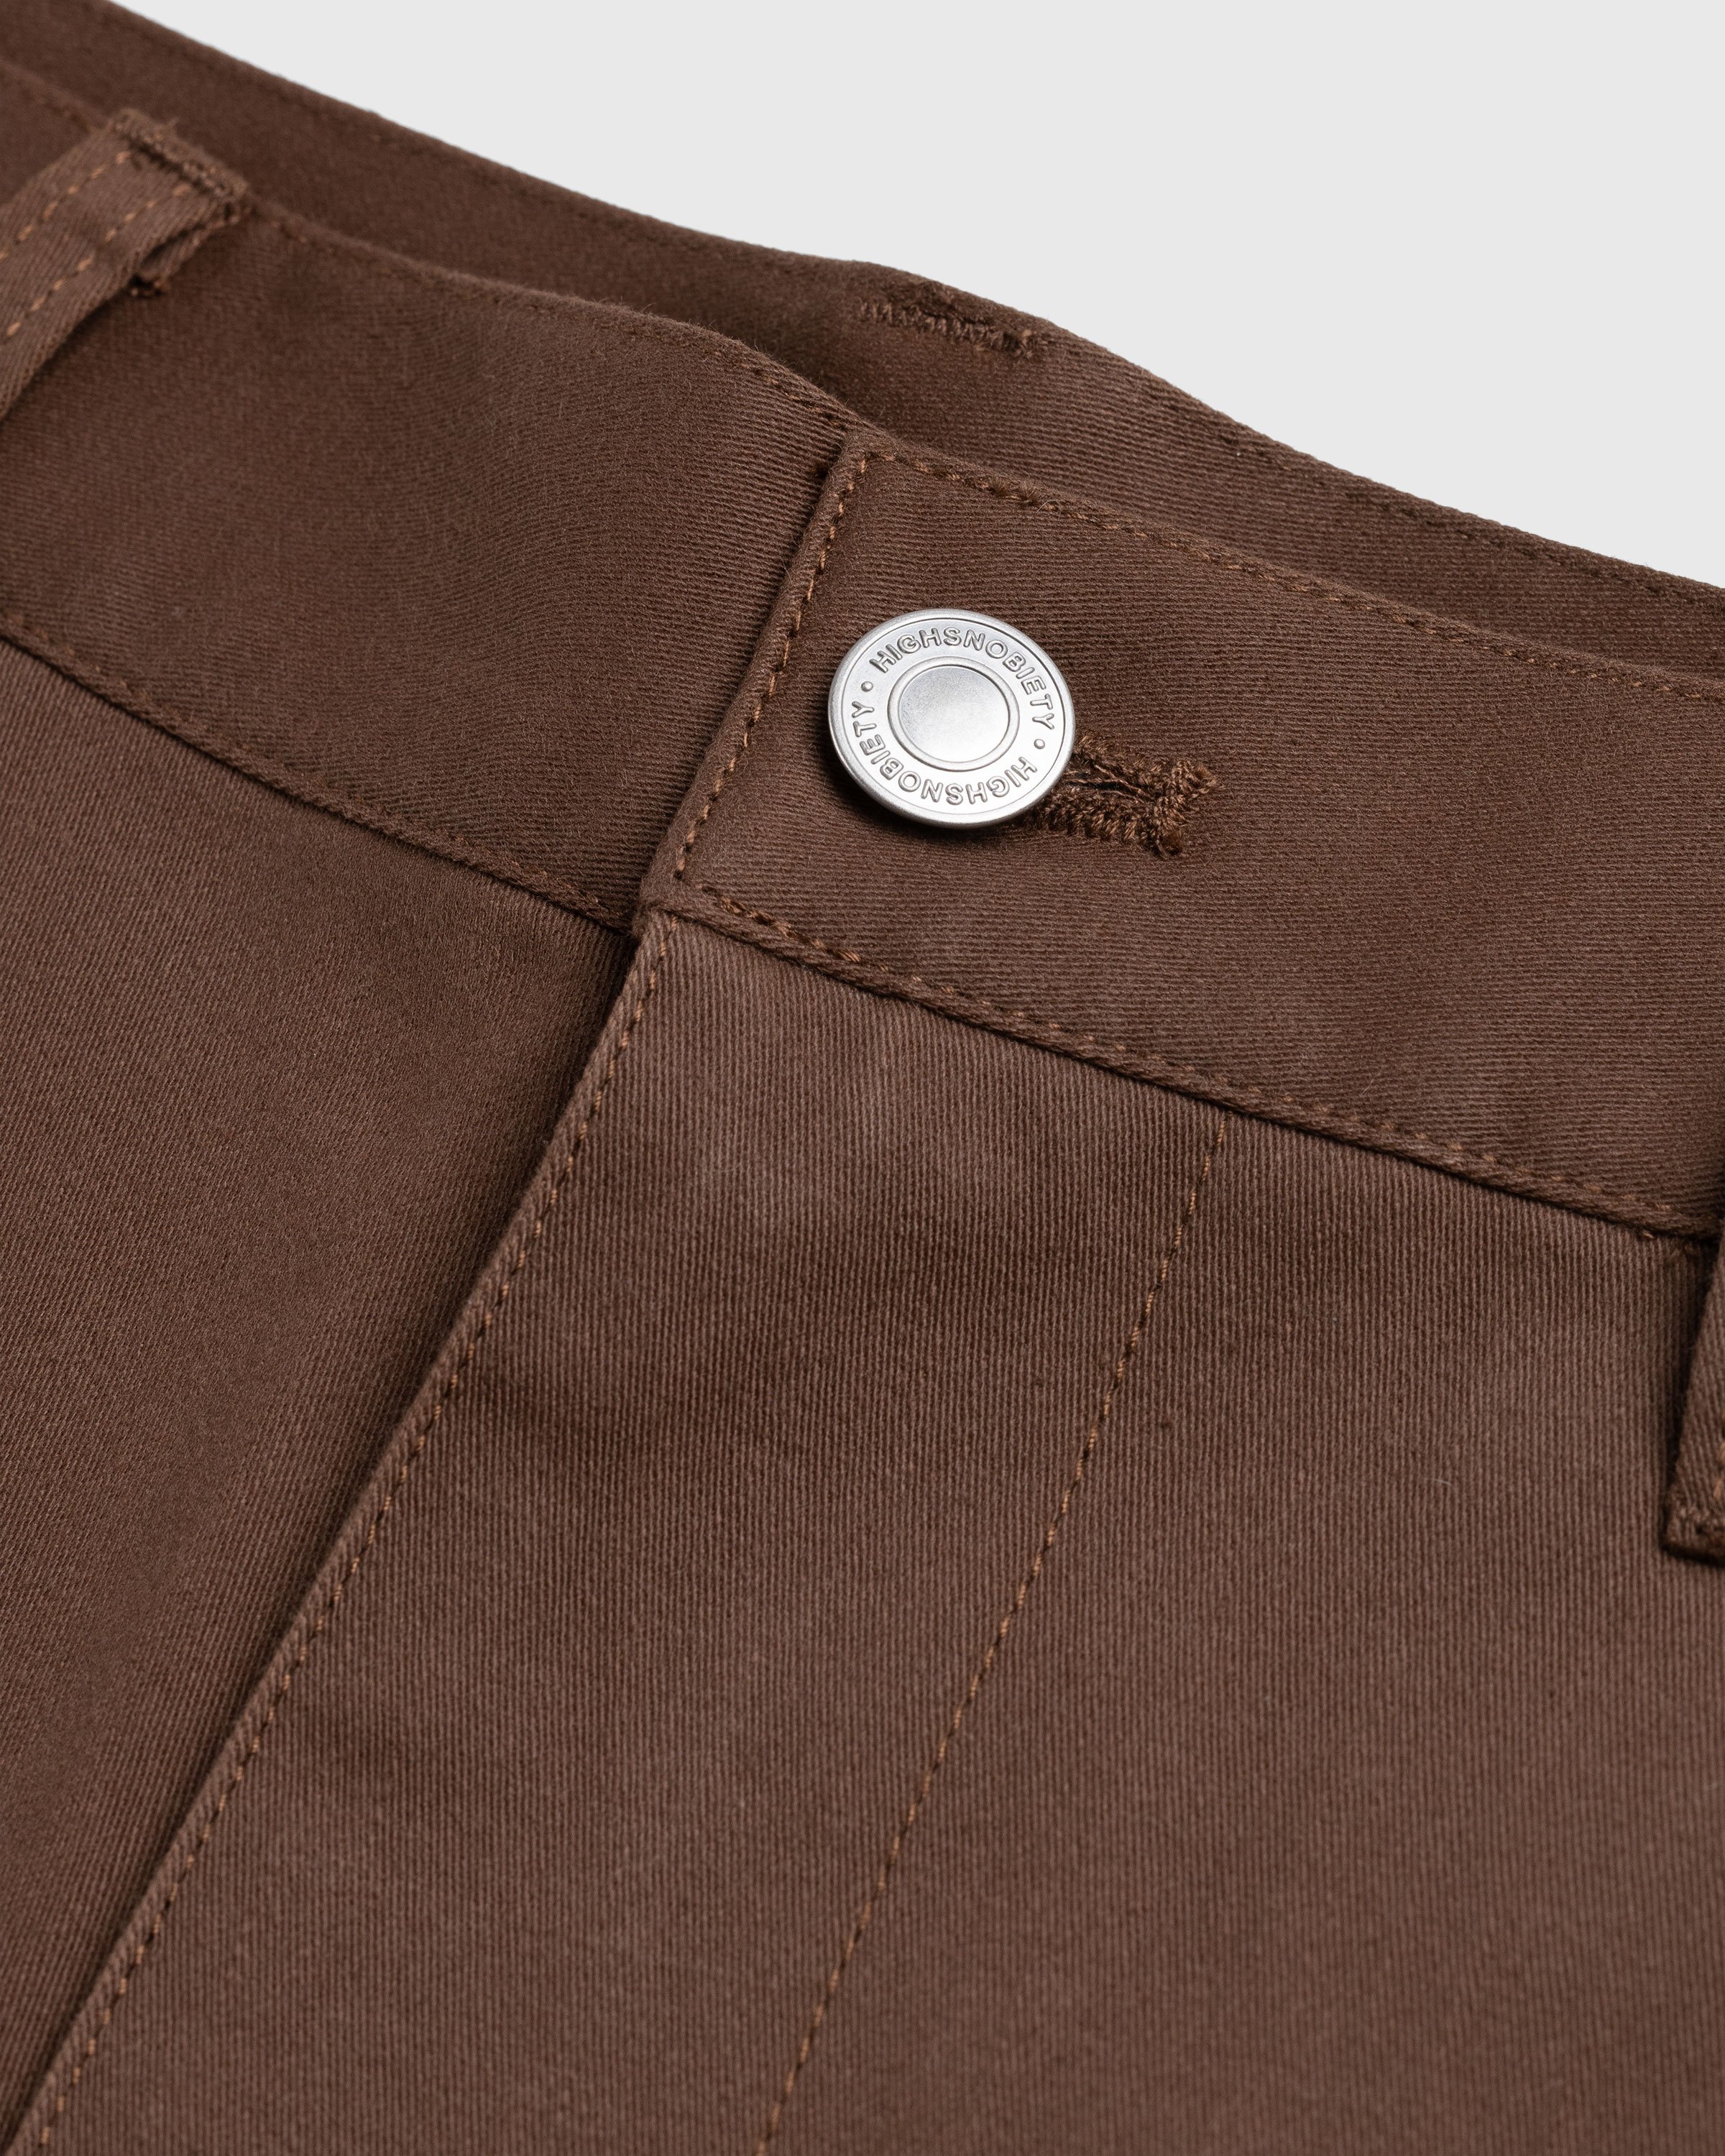 Highsnobiety HS05 - Reverse Twill Baggy Trouser Brown - Clothing - Brown - Image 6